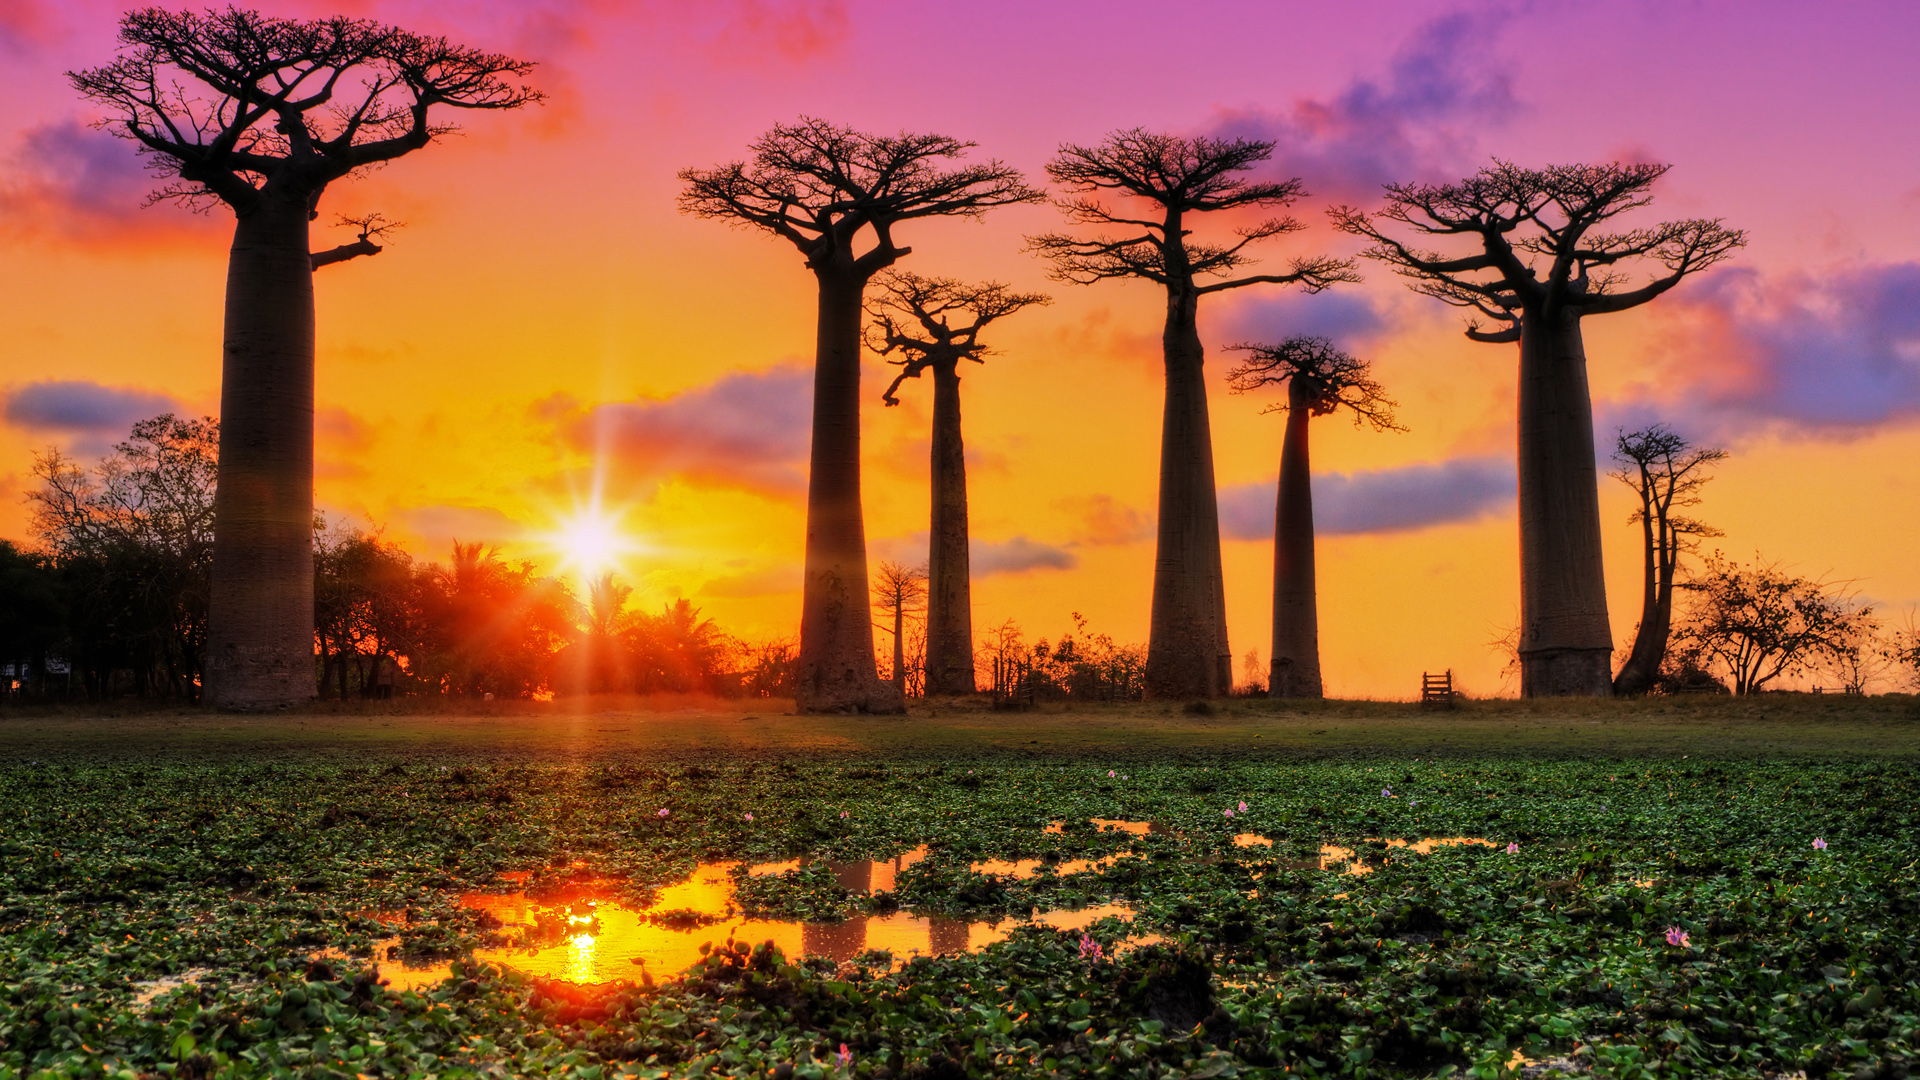 General 1920x1080 nature landscape far view trees plants lake water Lotus sunset clouds sky sun rays baobab trees baobabs Madagascar